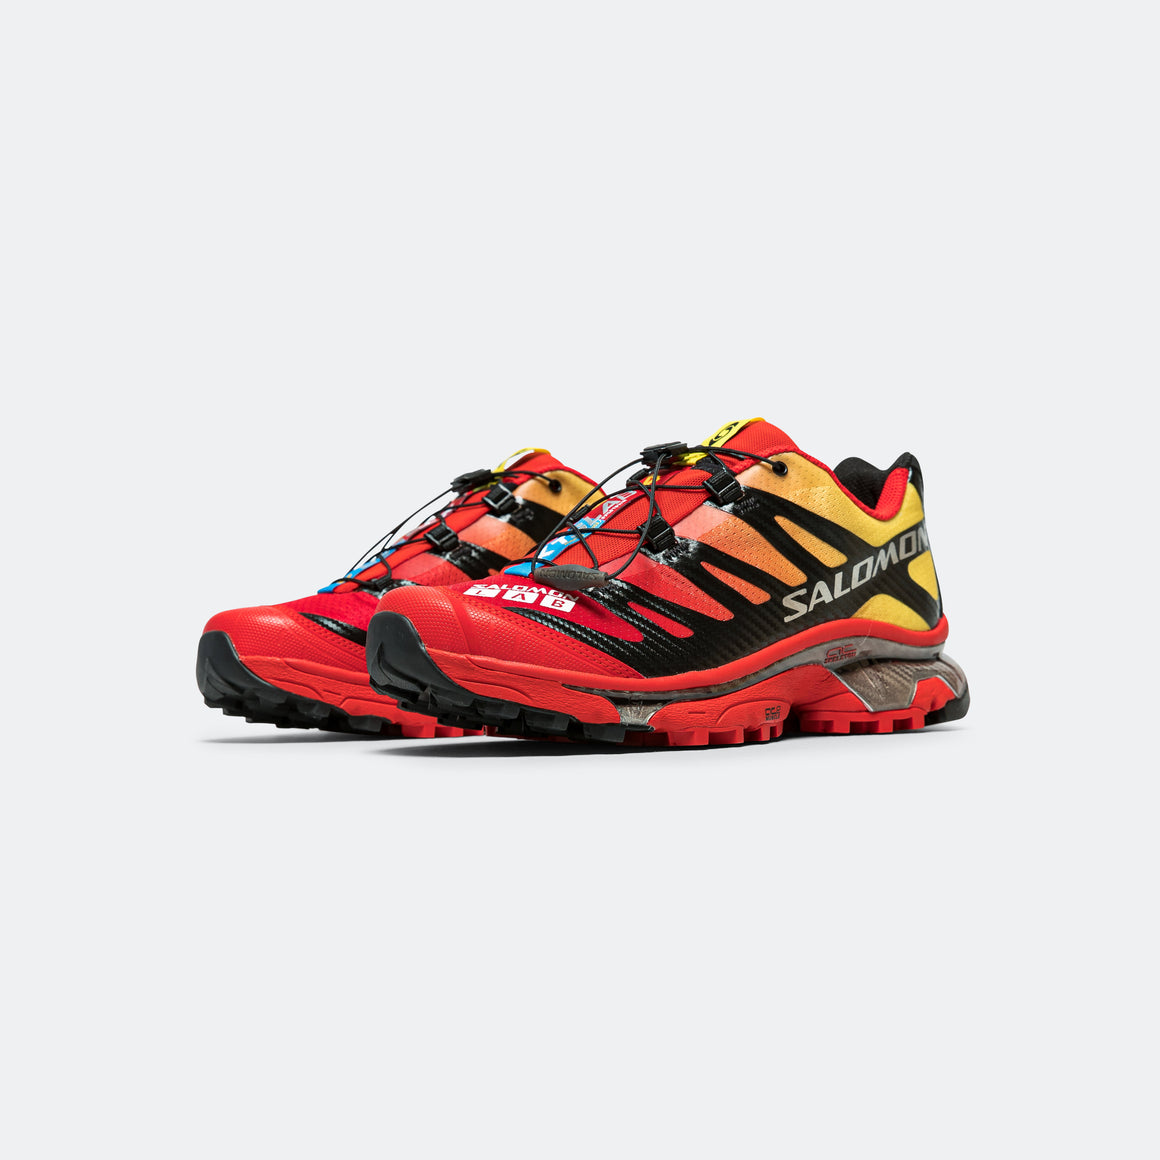 Salomon - XT-4 OG - Fiery Red/Black-Emplyel - UP THERE